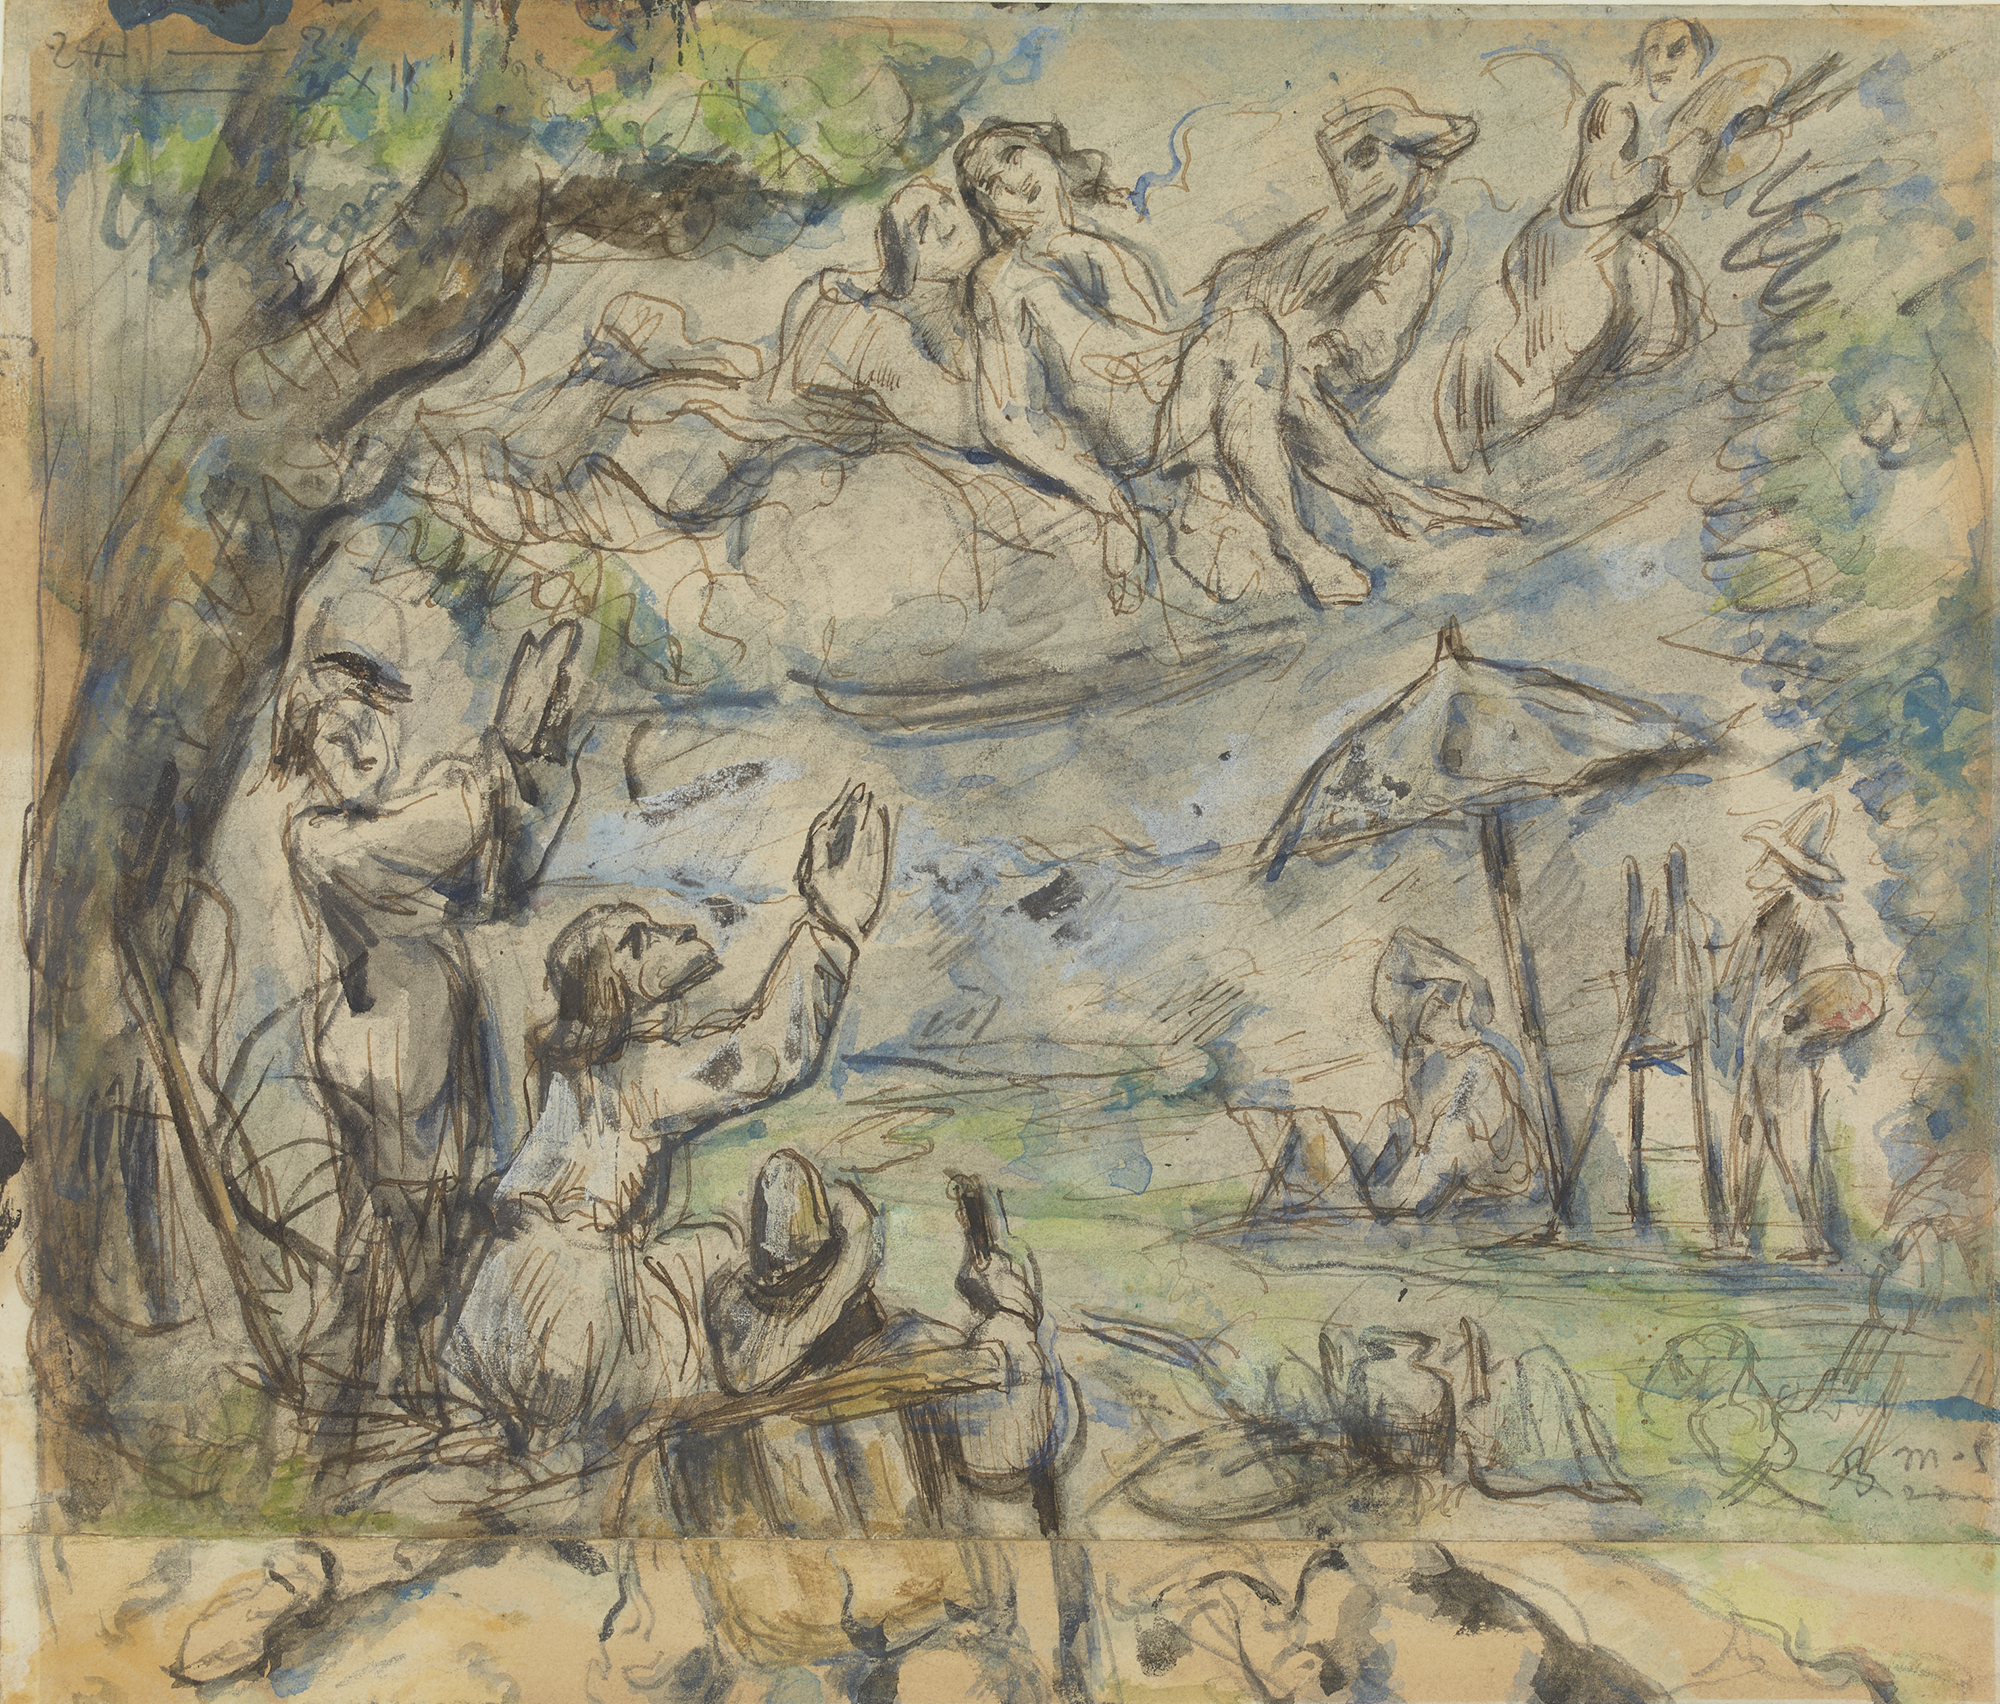 Cézanne's drawings at MOMA | The New Criterion